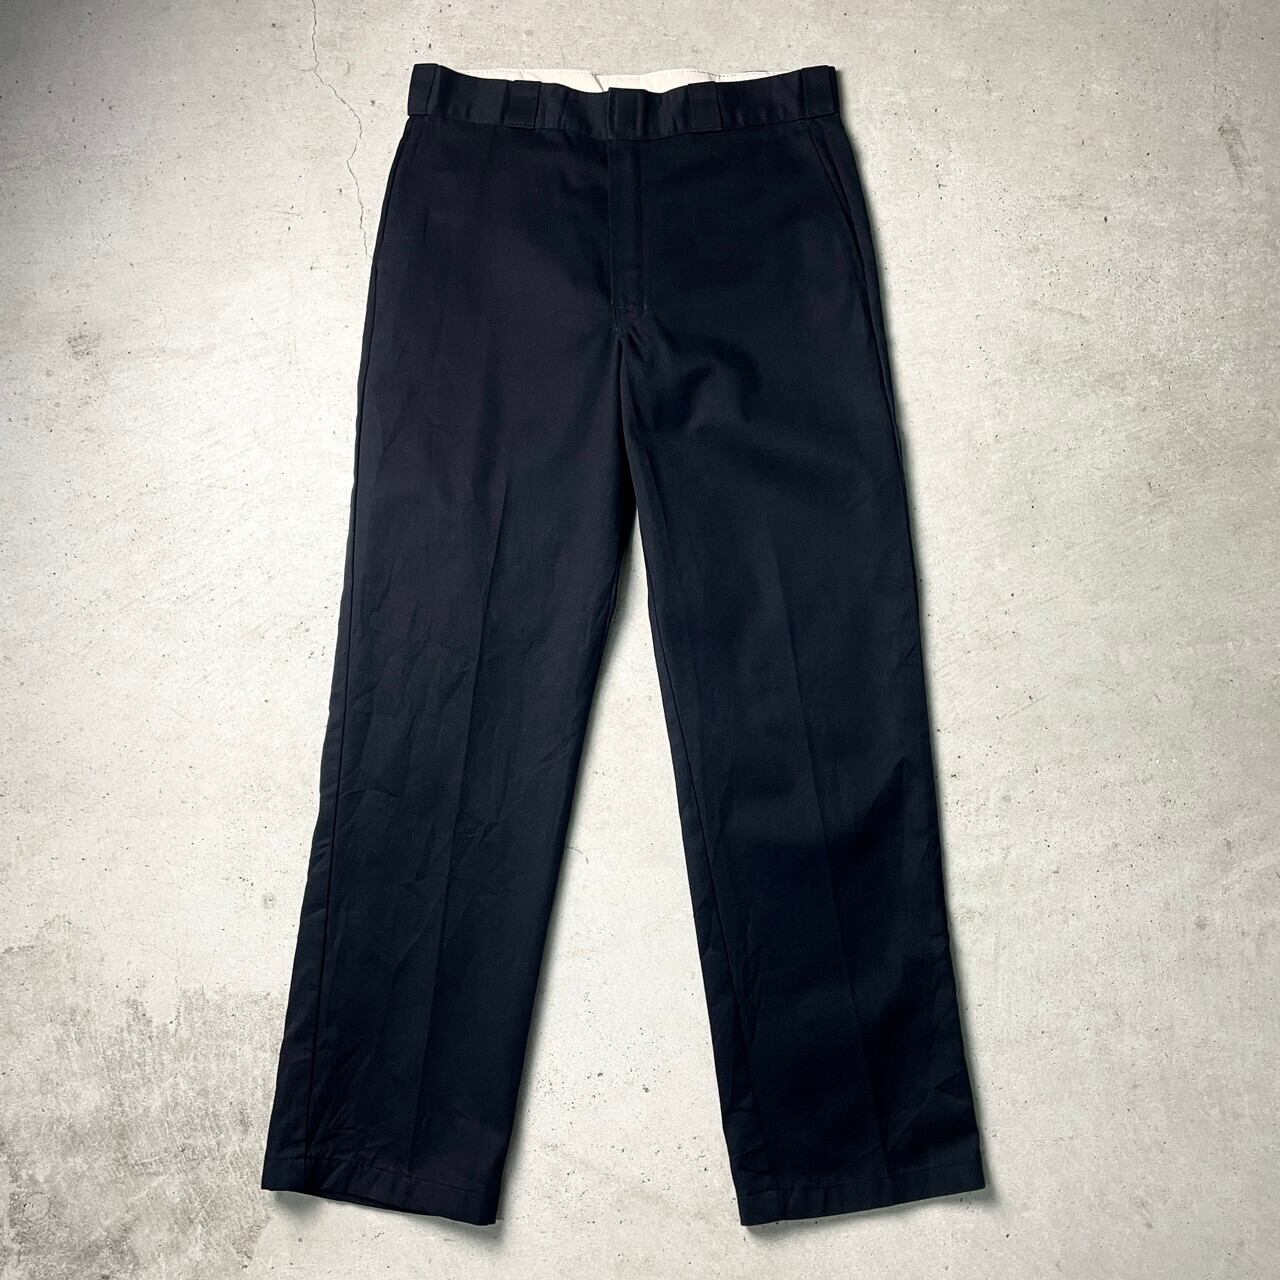 Dickies ディッキーズ 874 ワークパンツ メンズW34 古着 ブラック 黒【ワークパンツ】【PS2307P】 cave 古着屋【公式】古着 通販サイト